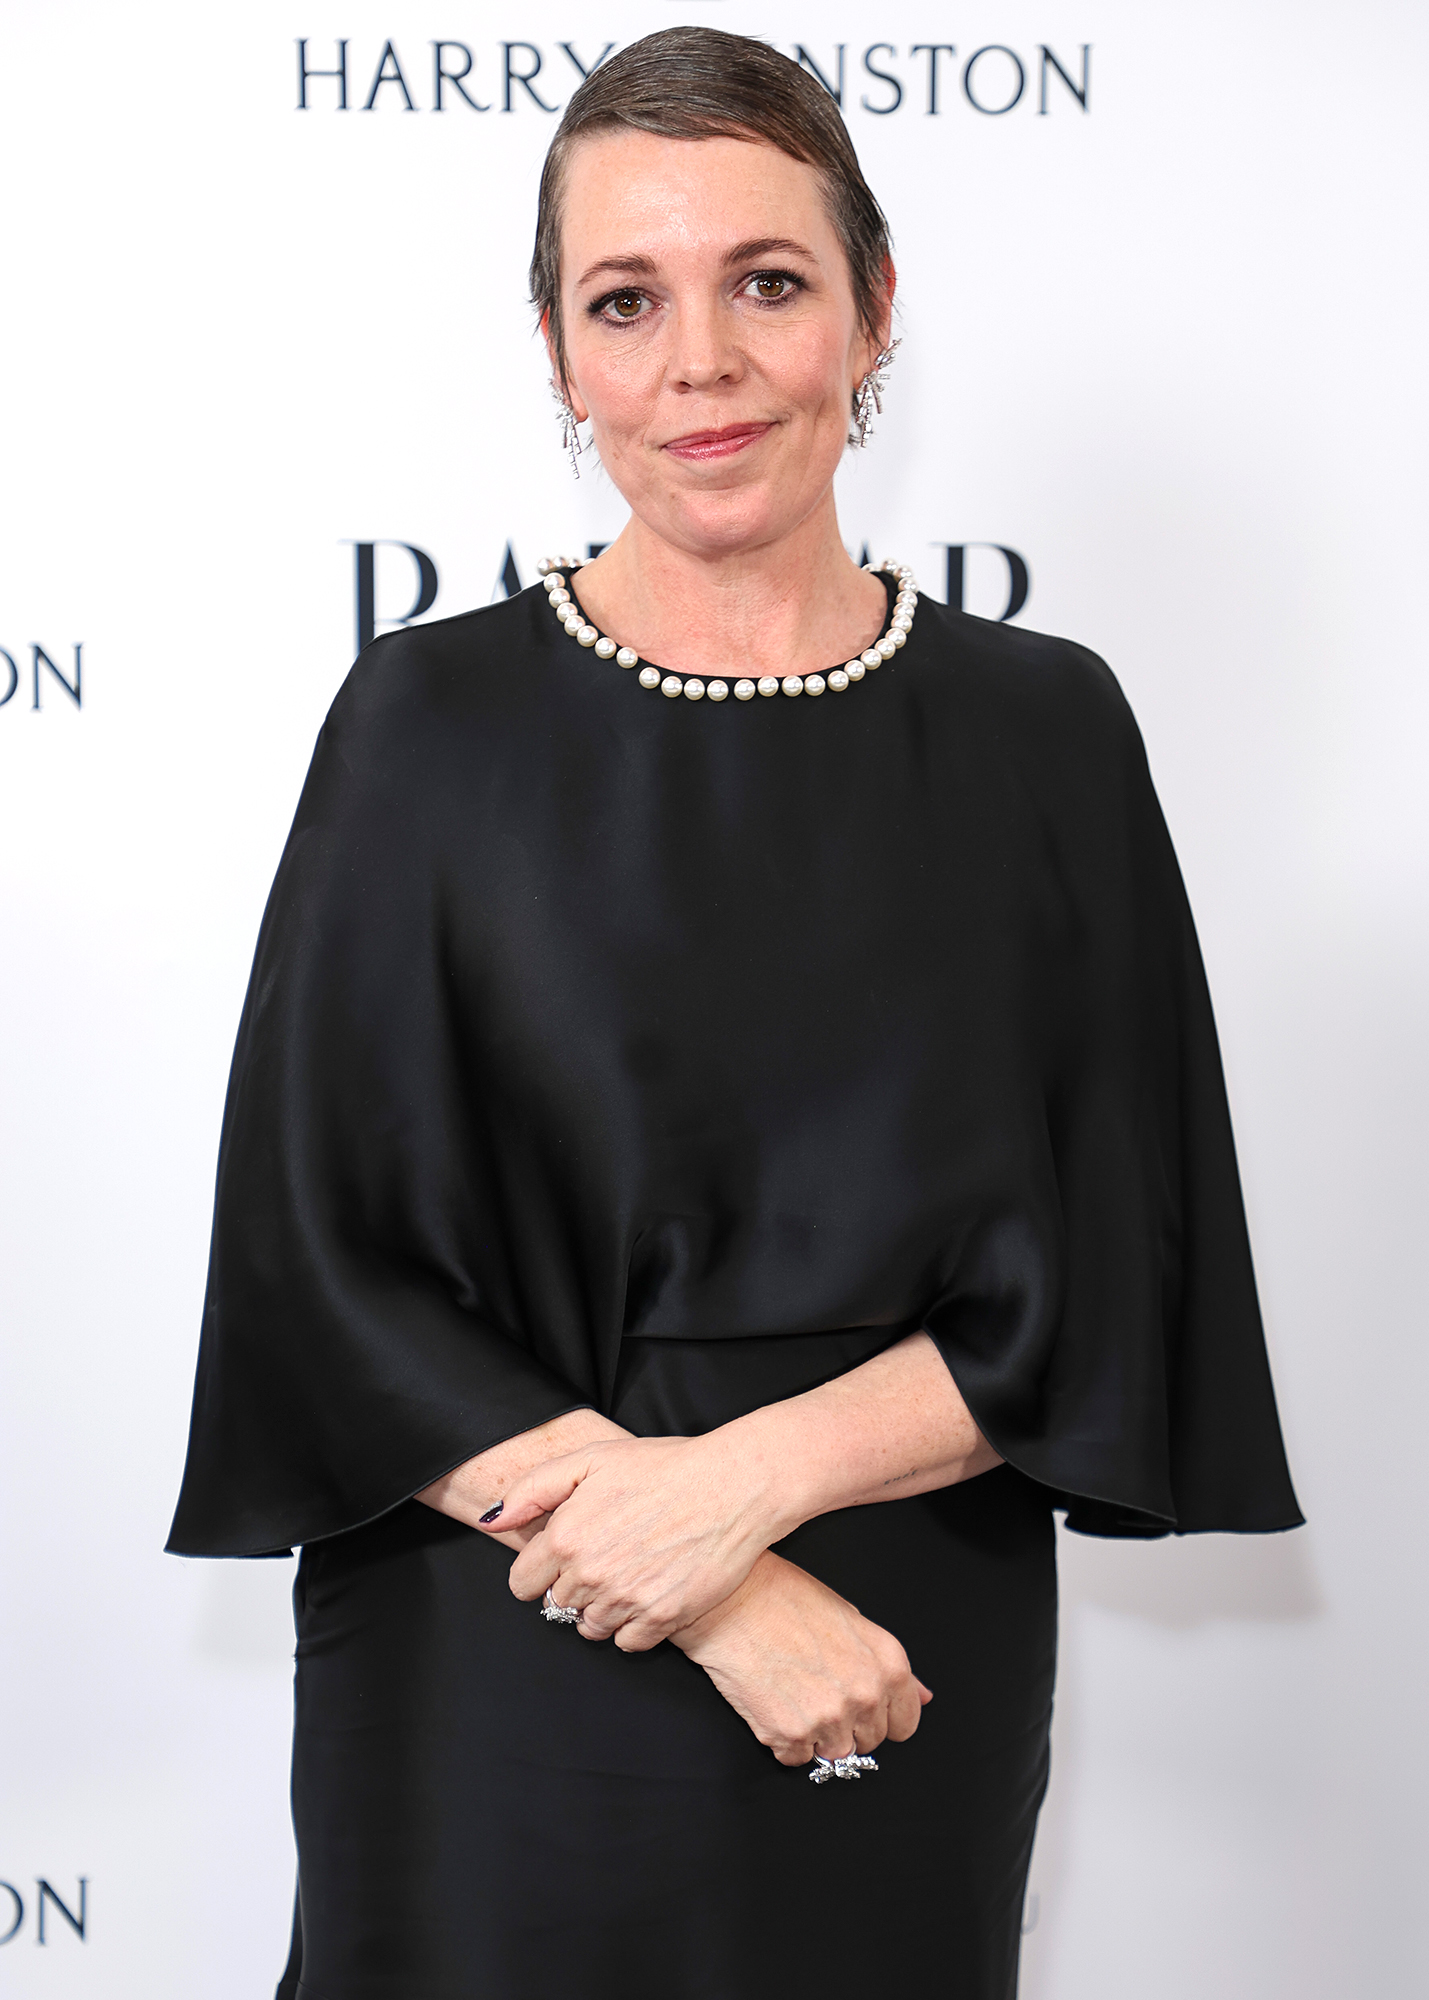 Olivia Colman Says If She Was ‘Oliver Colman’ She’d Be Earning ‘A F–k Of a Lot More’